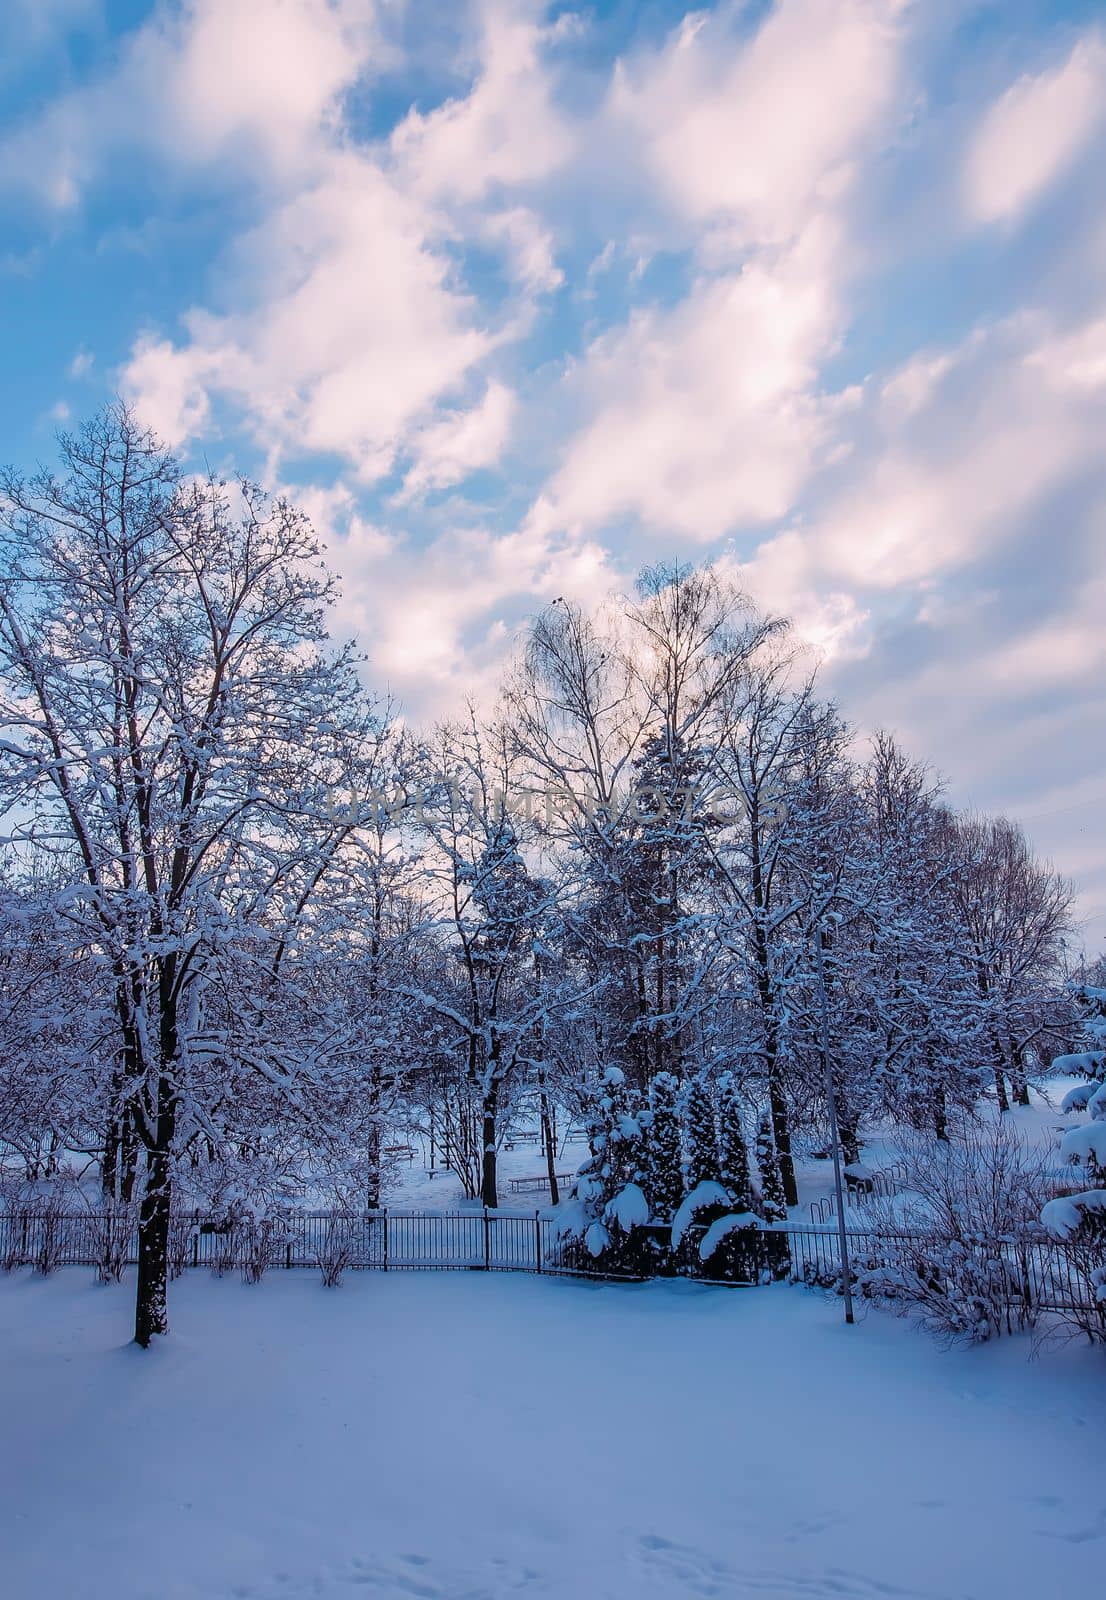 Winter landscape with snow-covered trees. by nightlyviolet